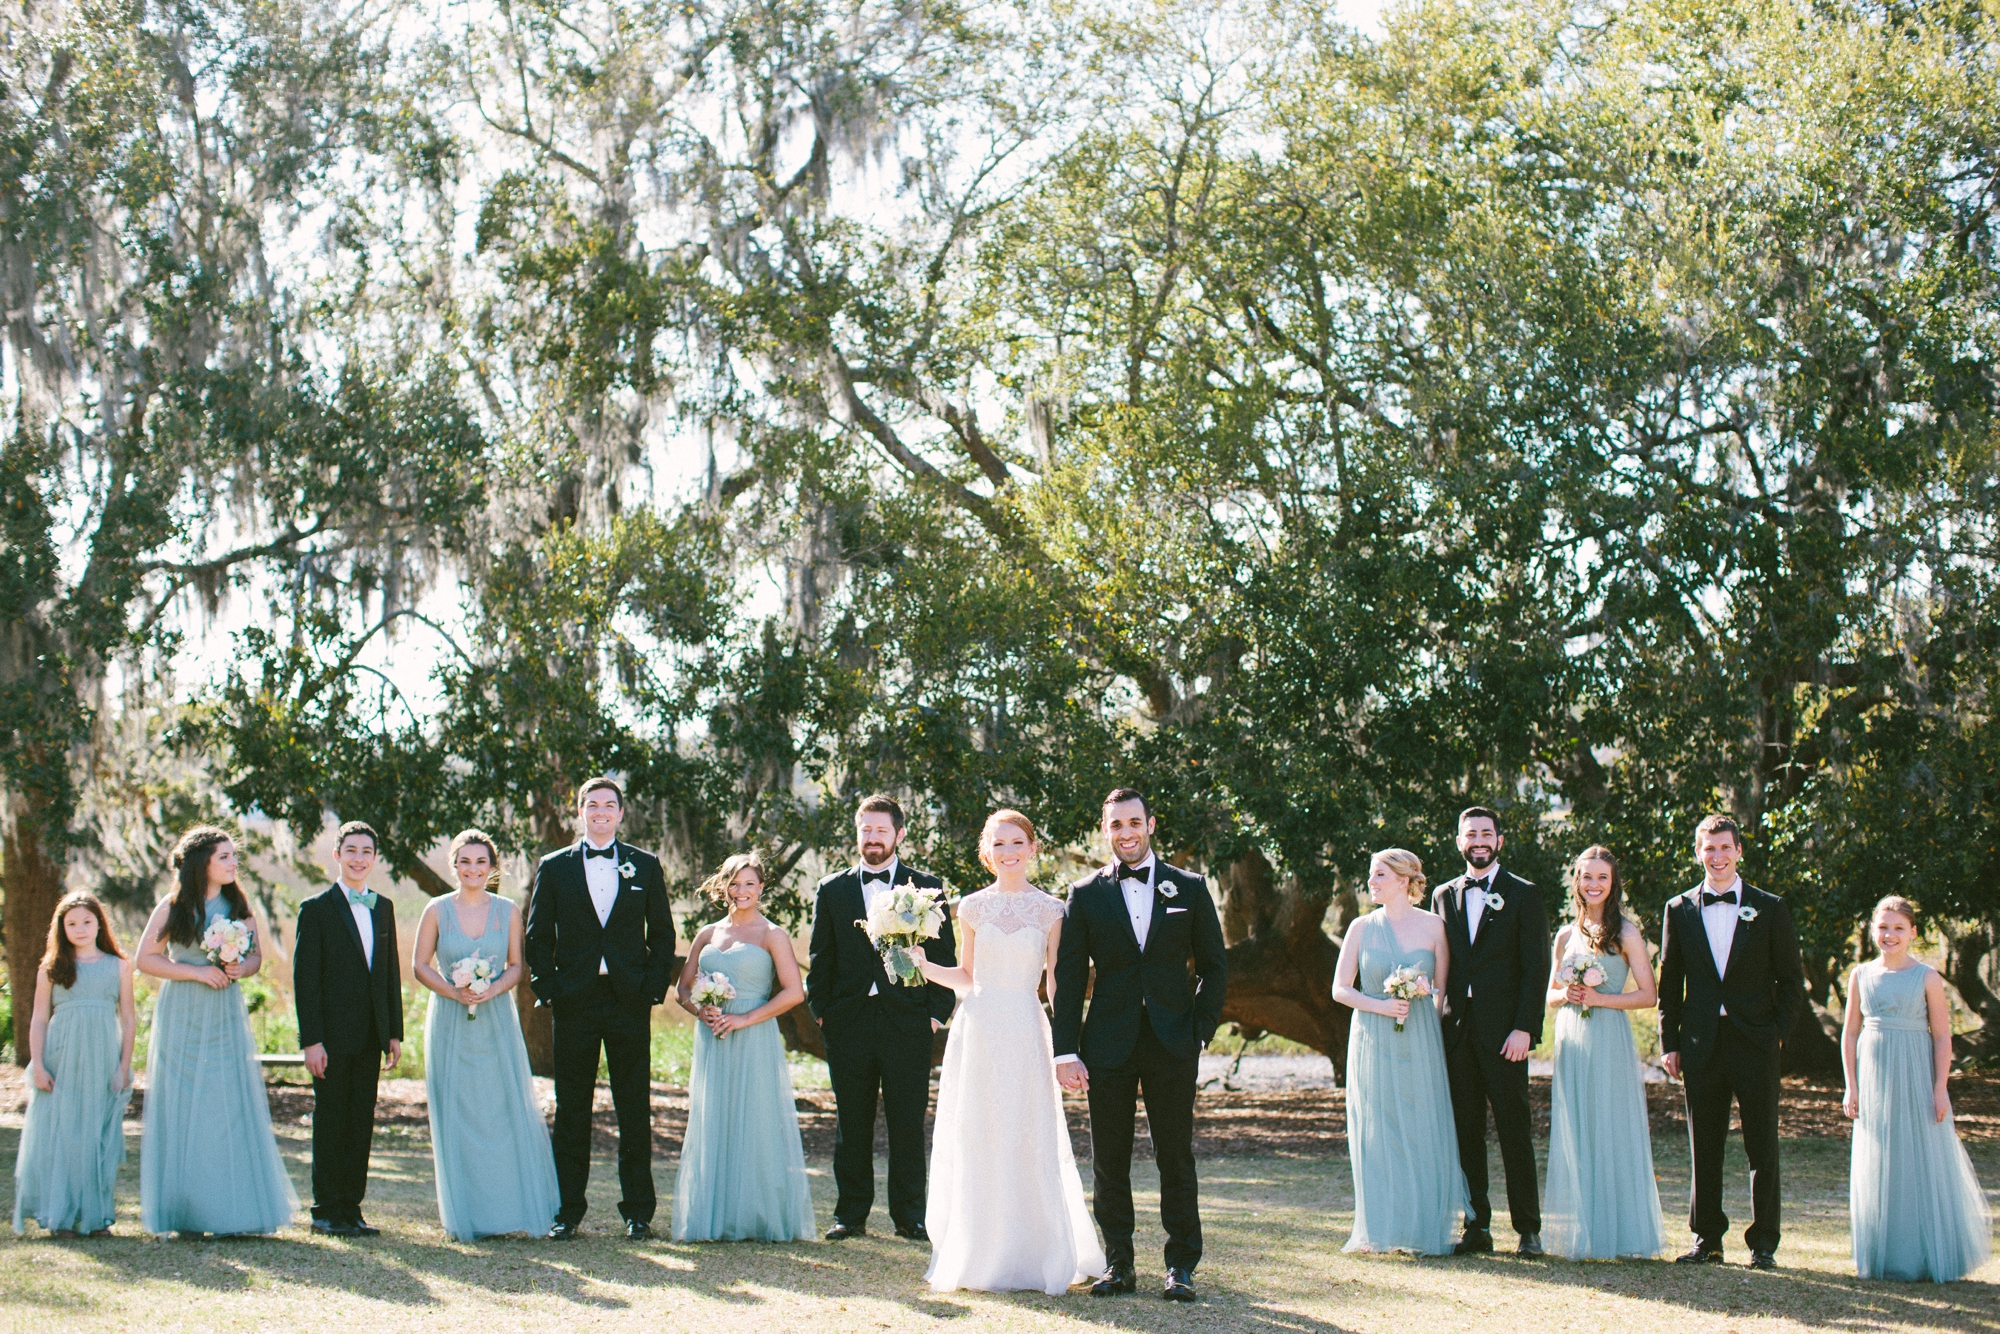 Alexandra & Taylor's Fall wedding at Boone Hall — A Lowcountry